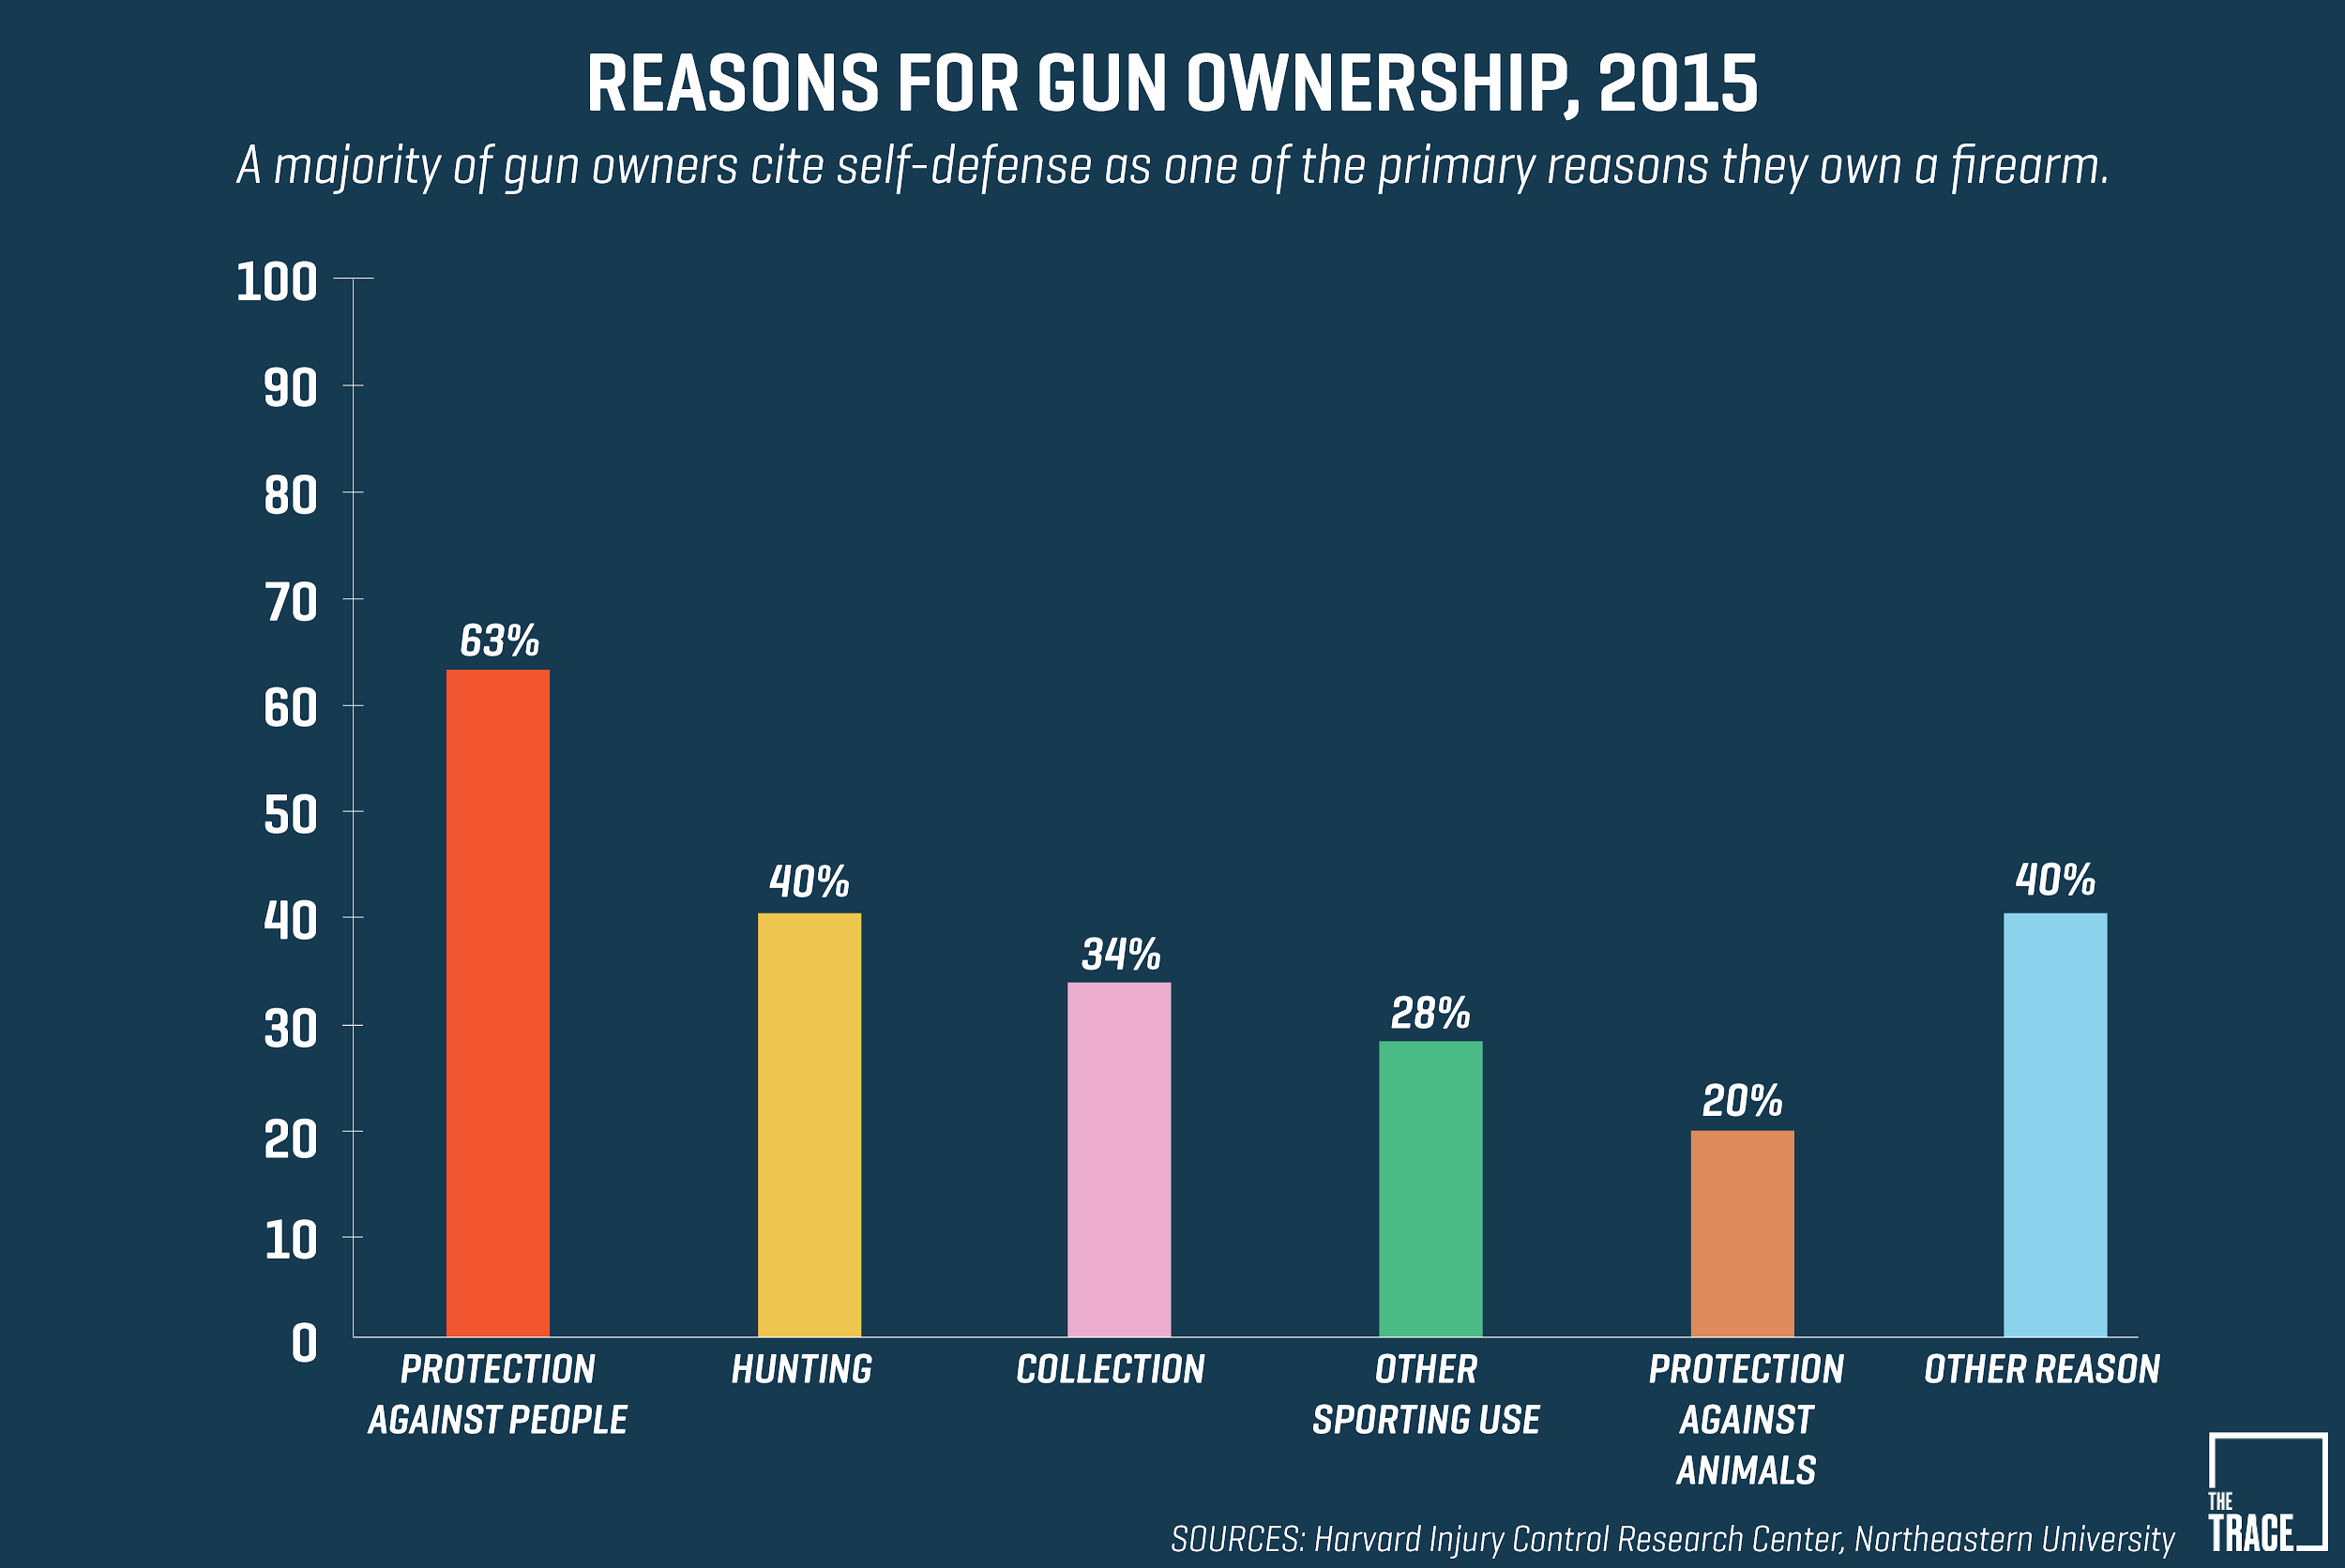 What studies reveal about gun ownership in the US